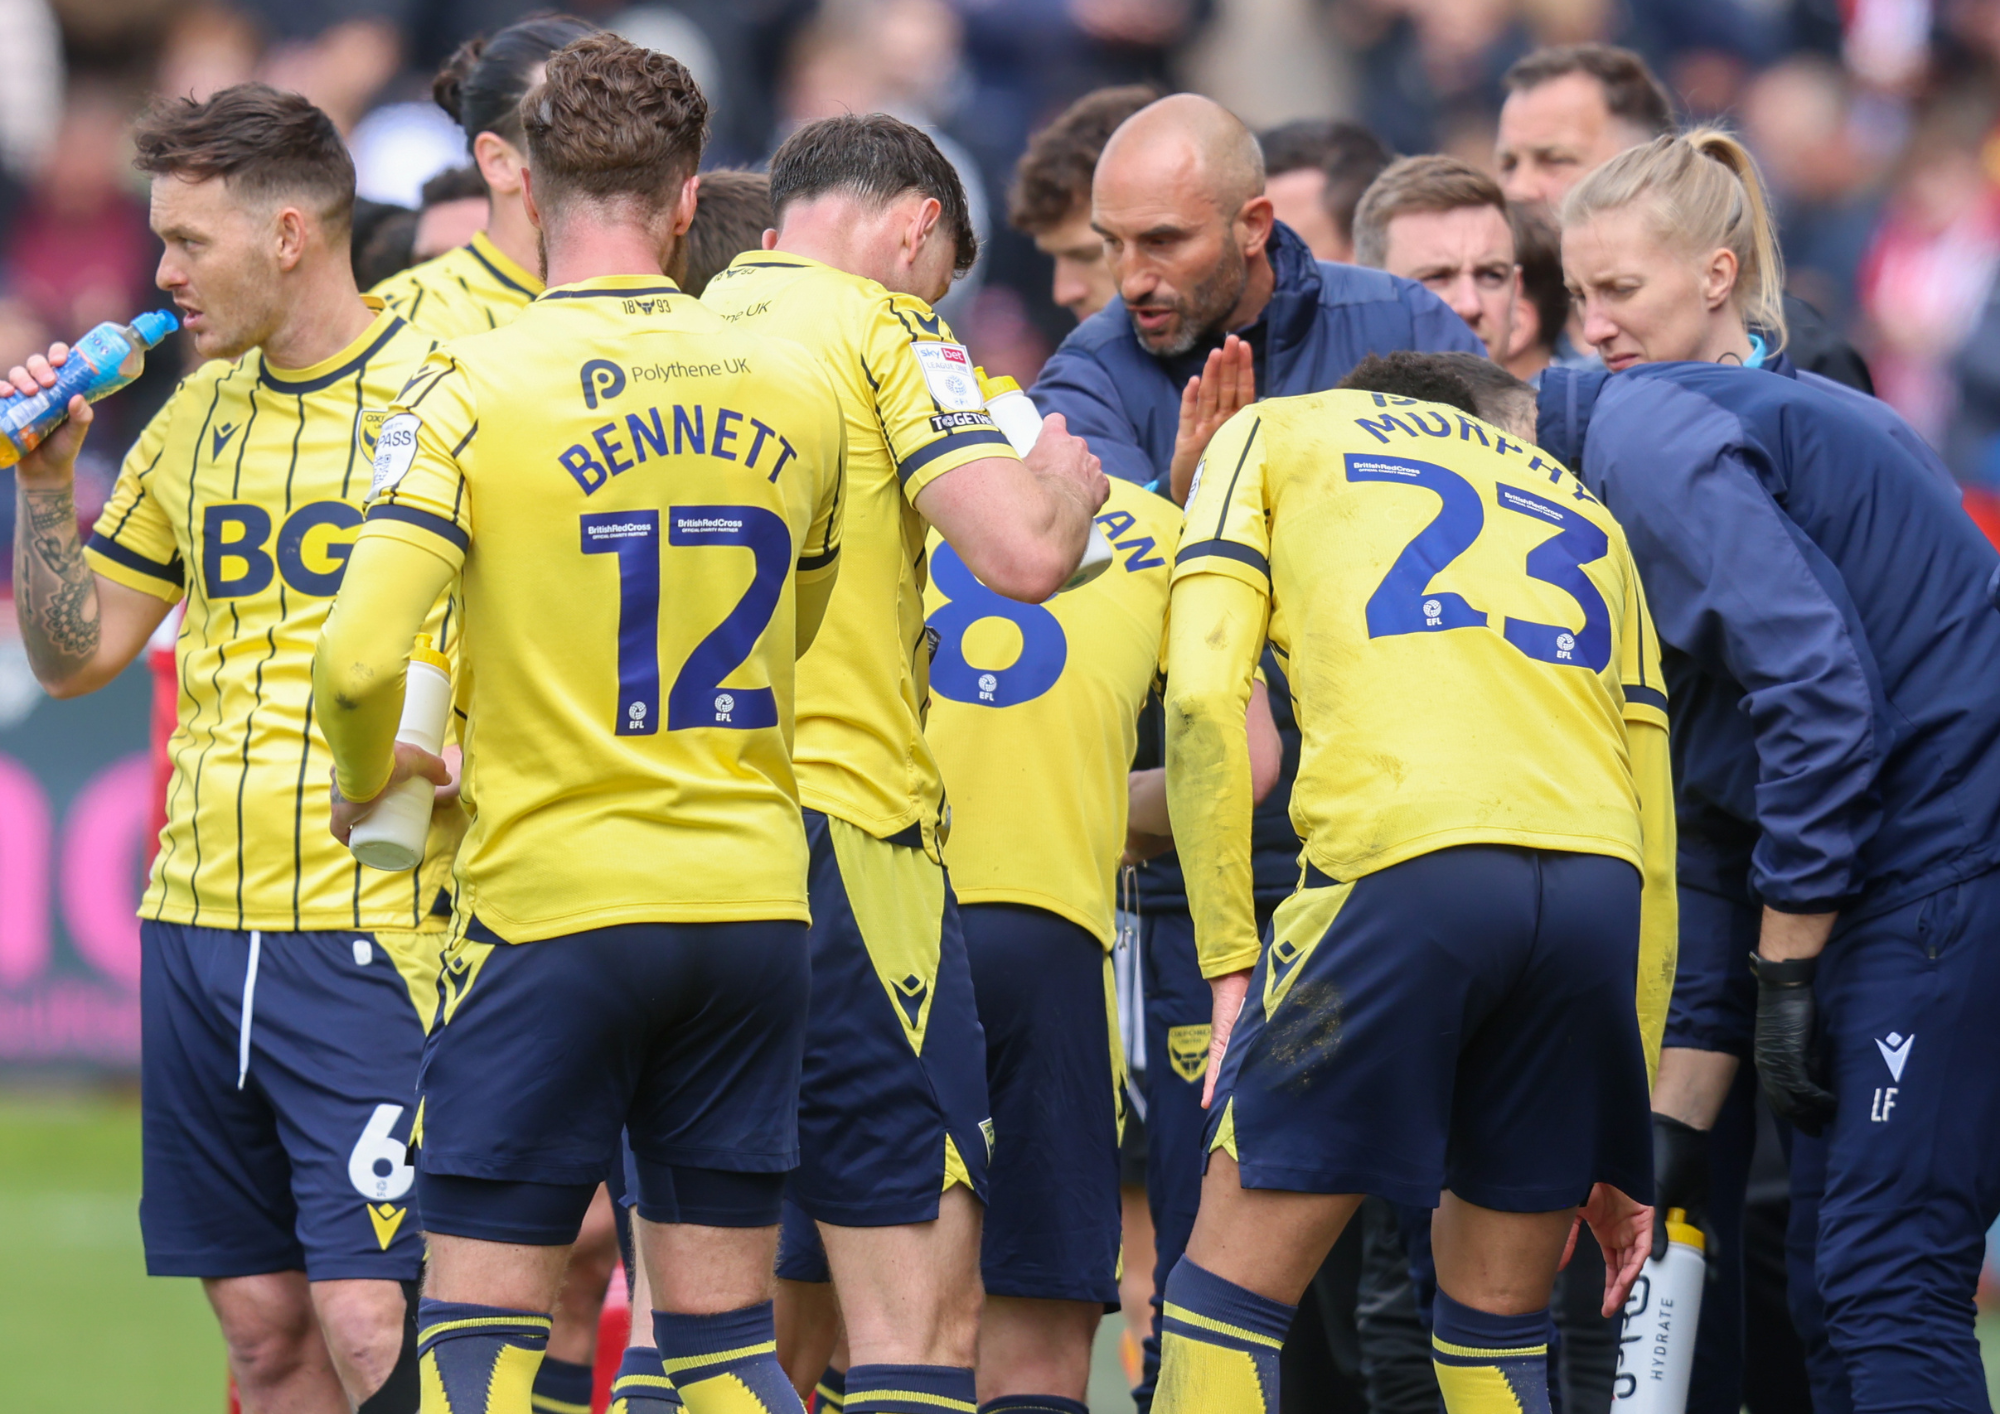 Oxford United boss Des Buckingham on keeping track of play-off scores